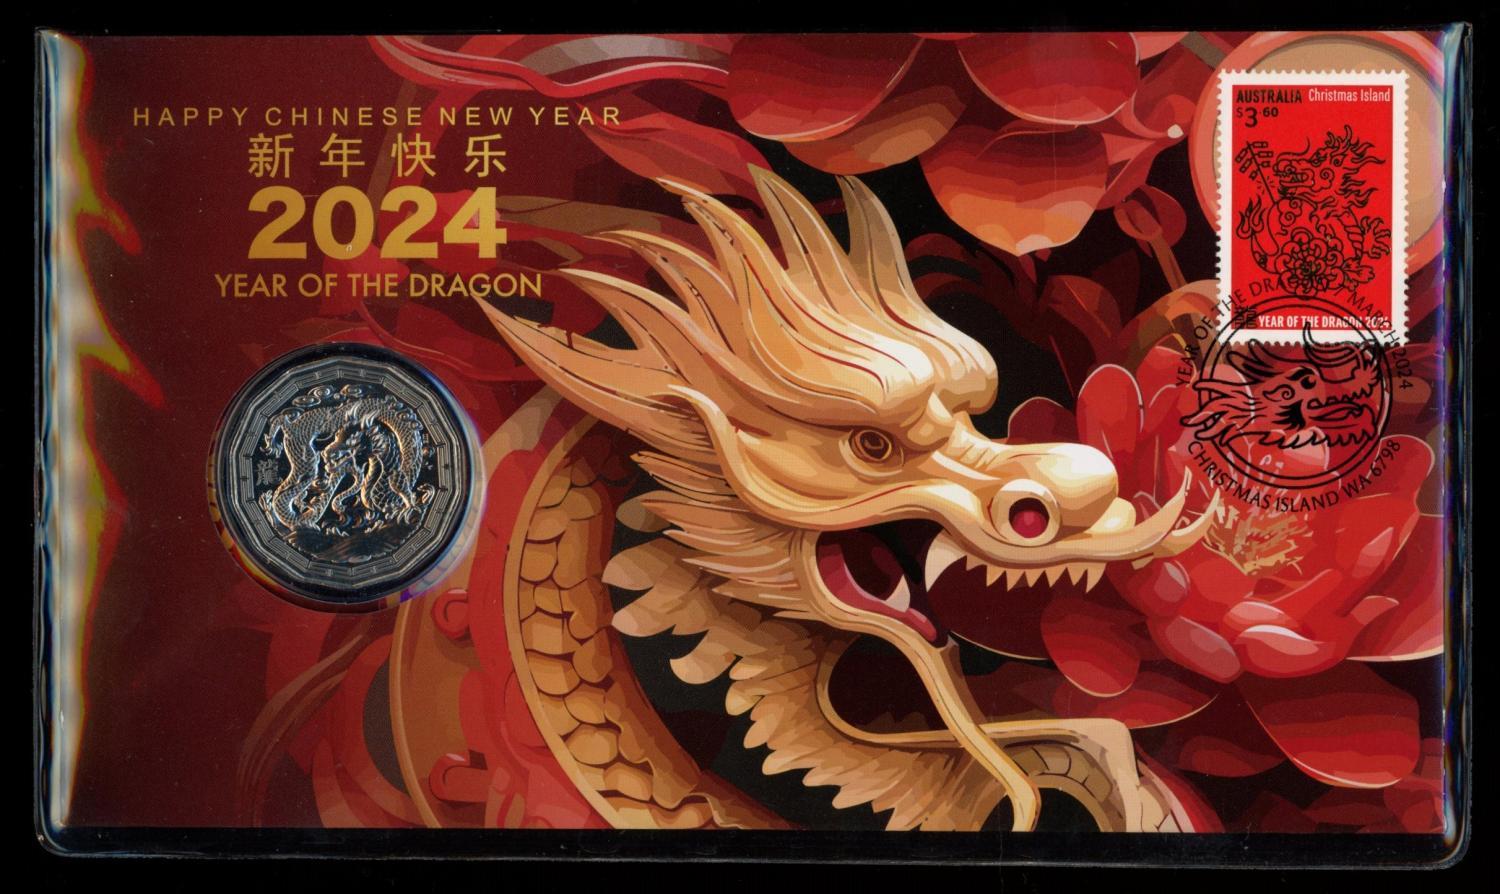 Royal Australian Mint Happy Chinese New Year, Year of the Dragon 2024 PNC